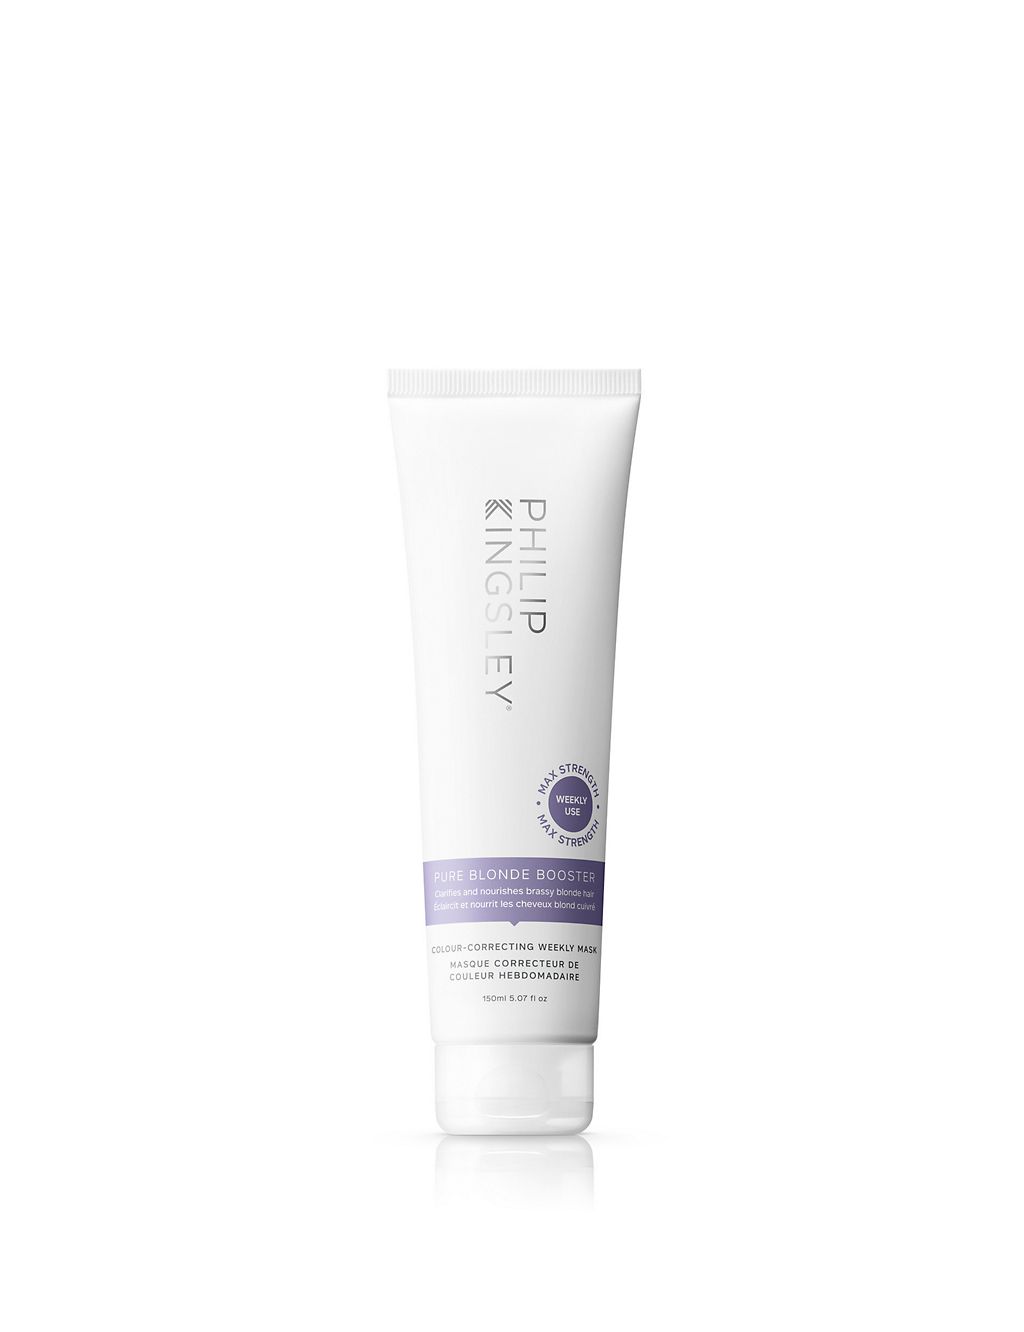 Pure Blonde Booster Mask 150ml 1 of 2